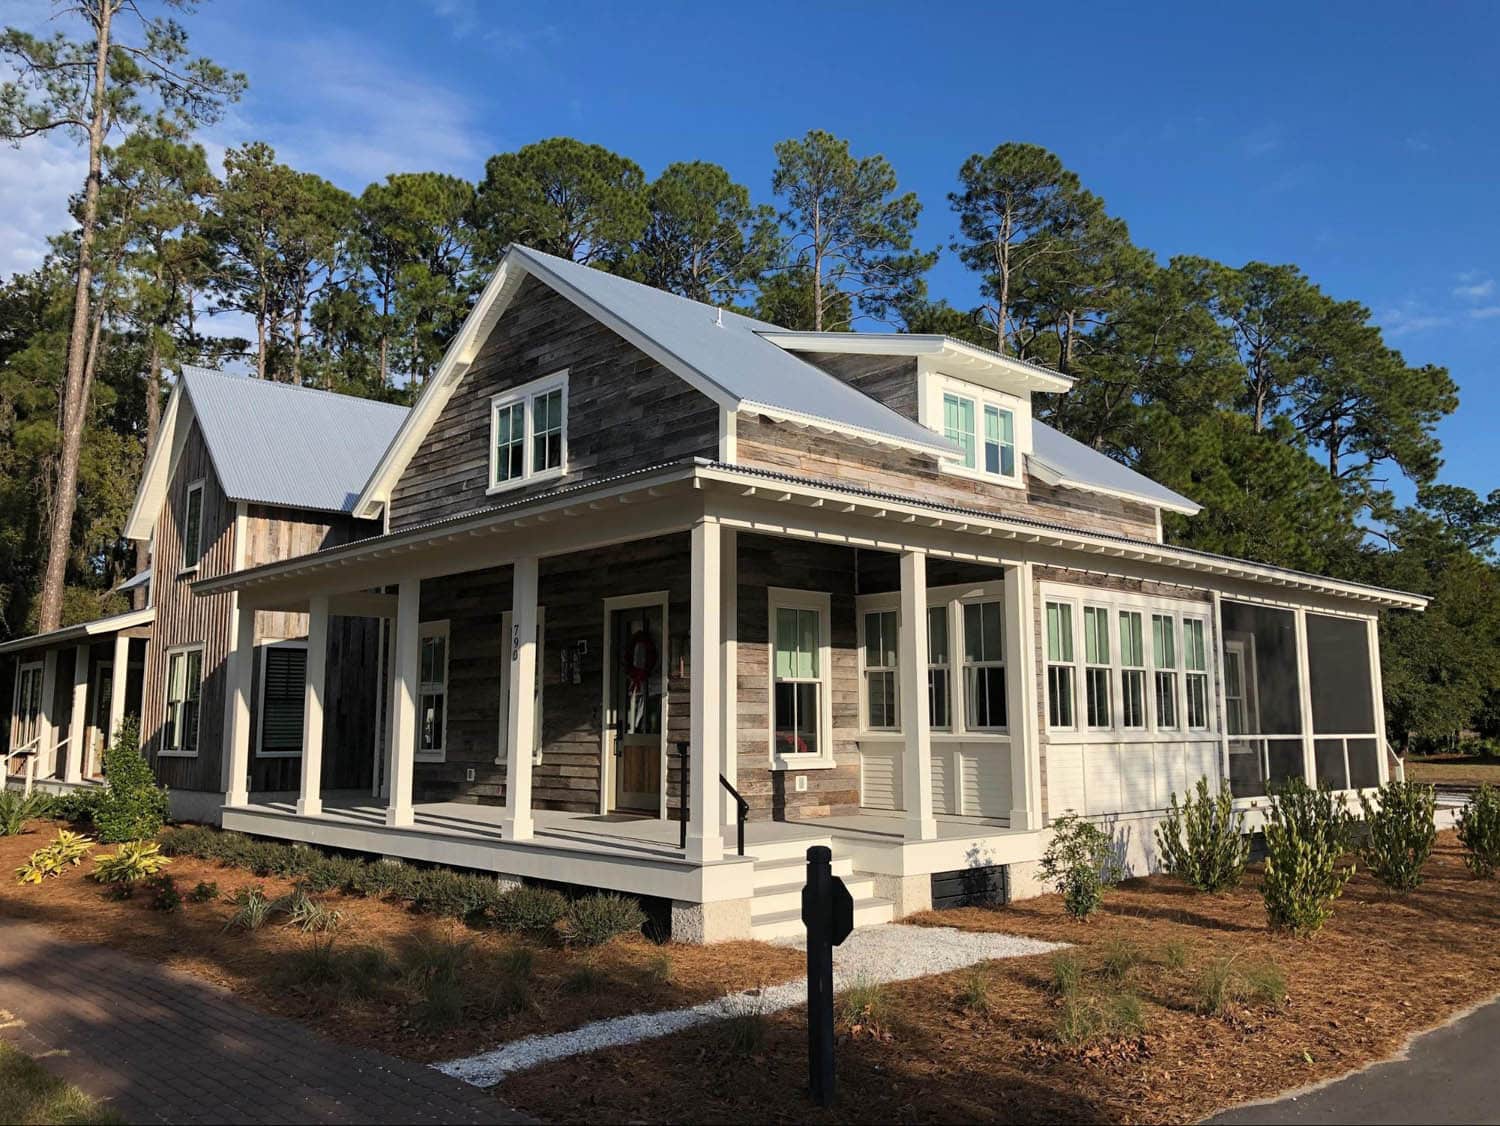 Wood house with large wraparound porch